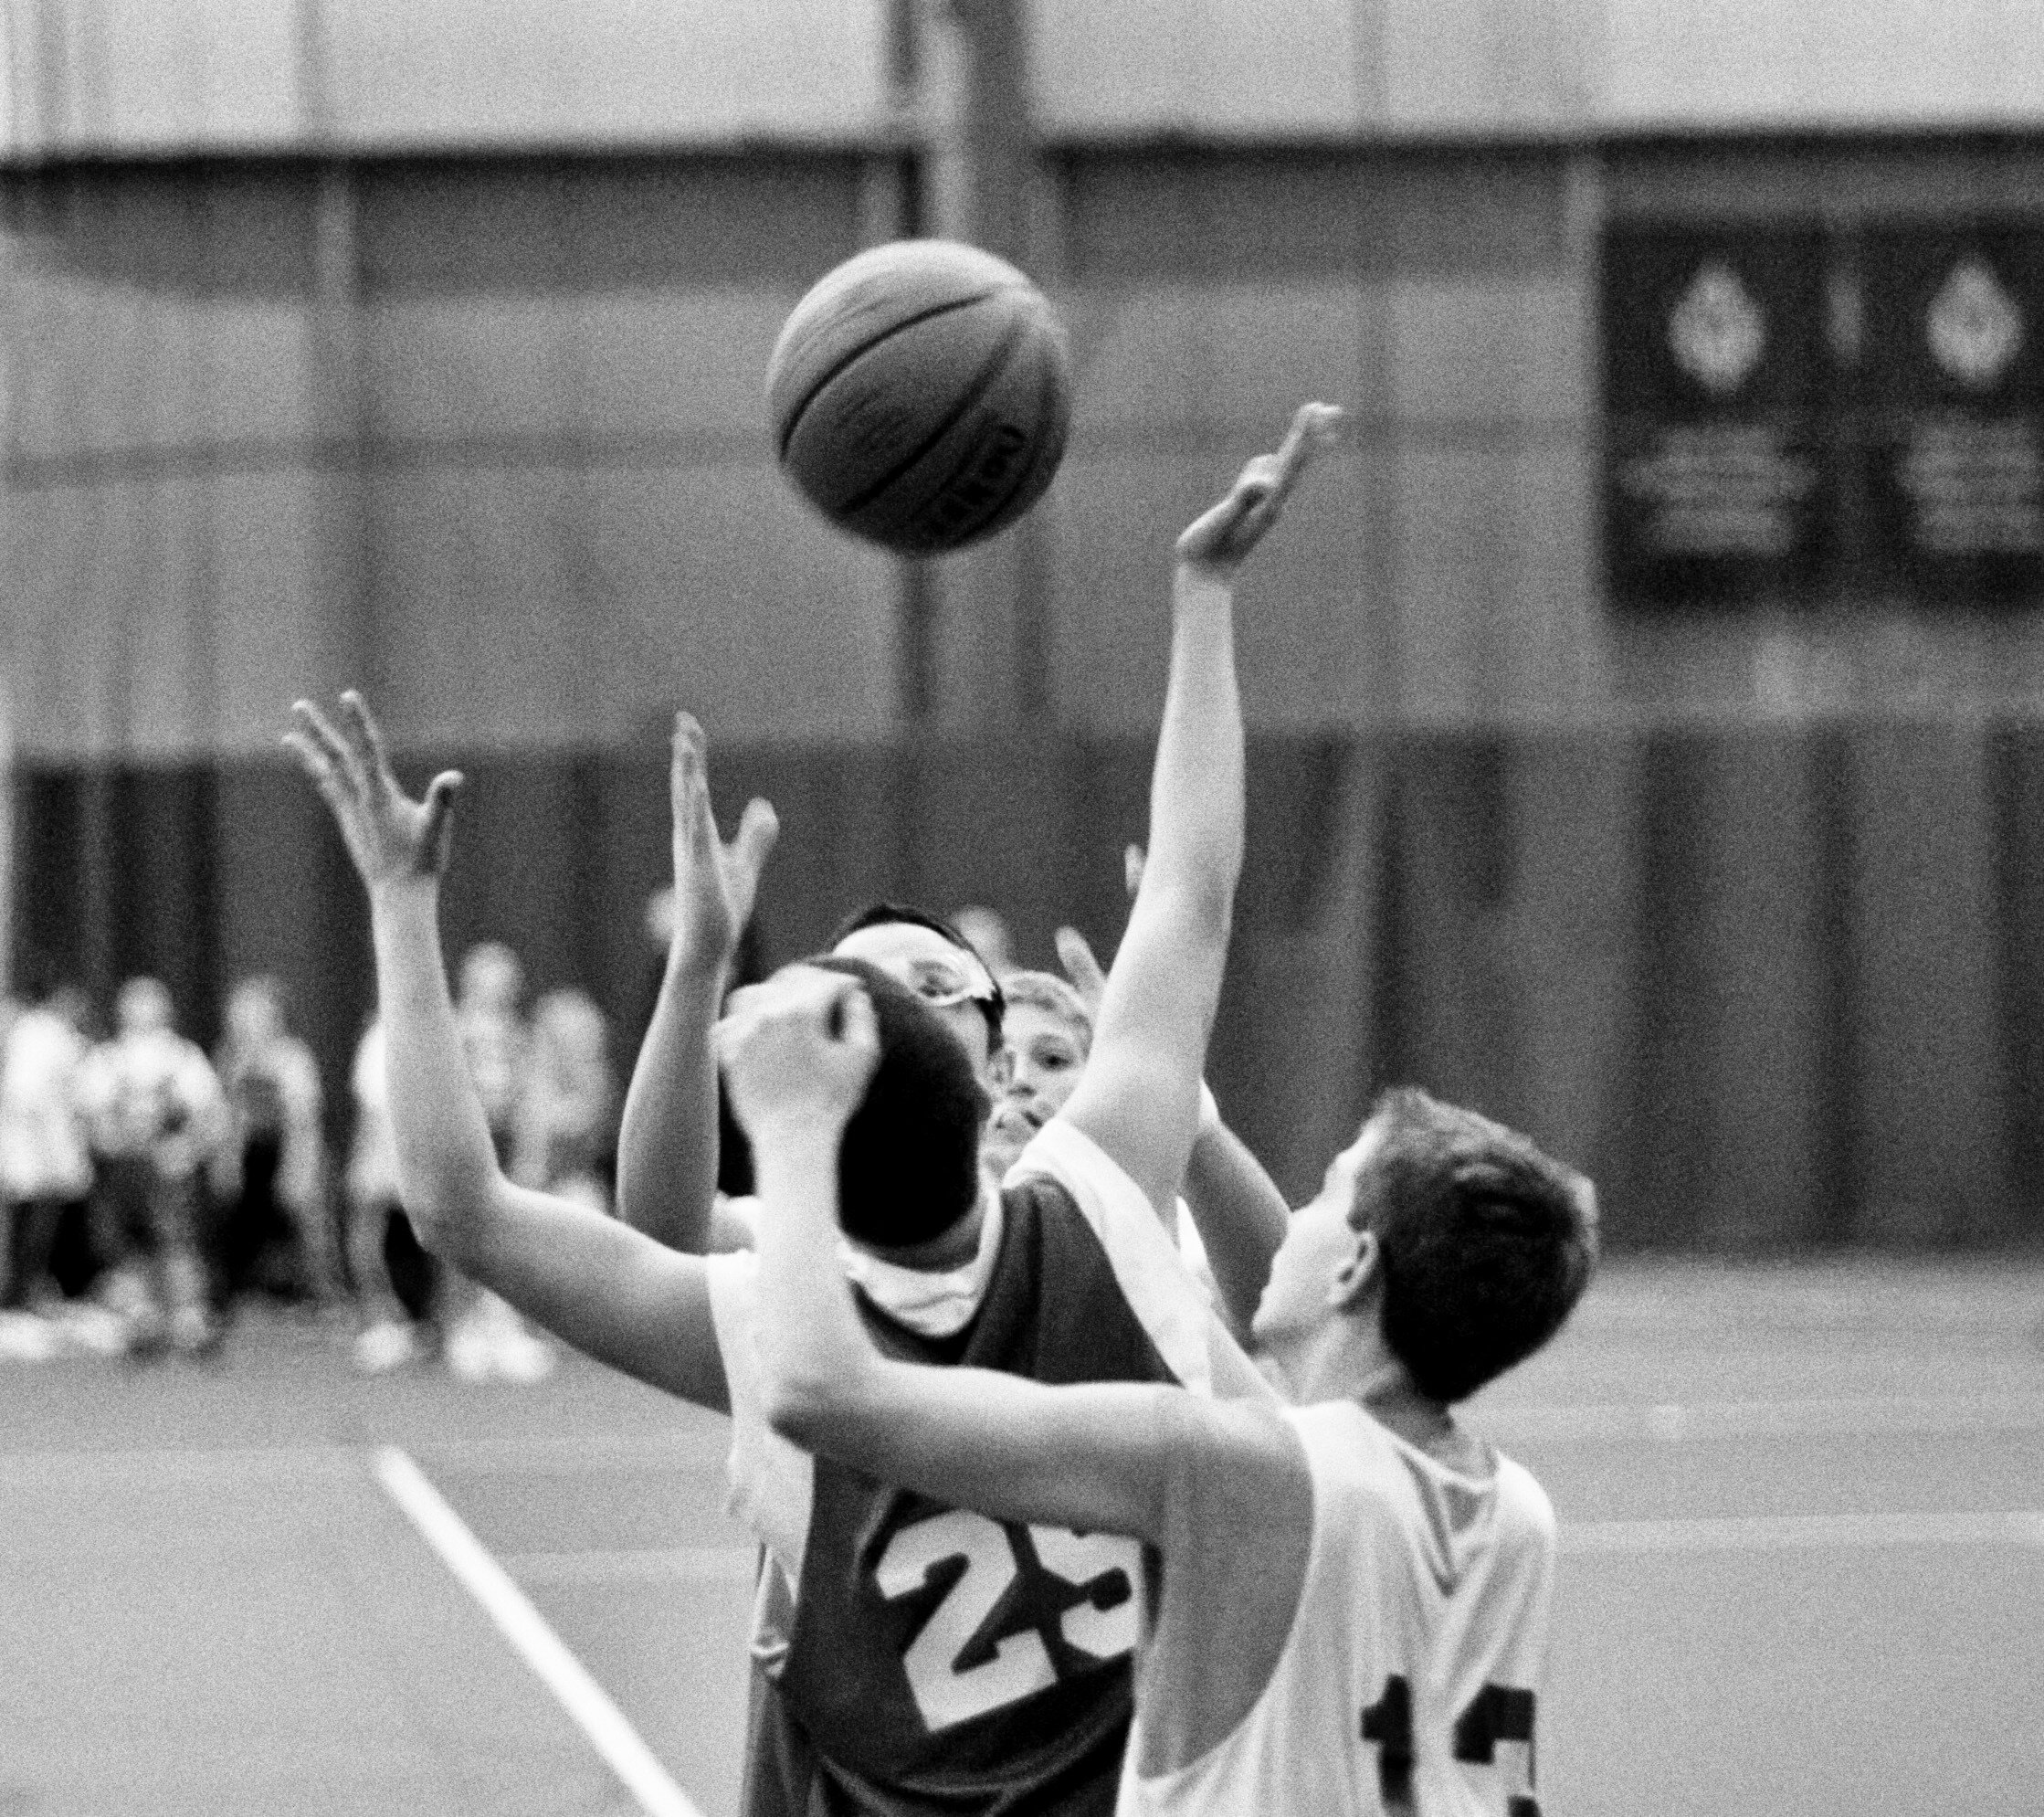 Ball up for grabs in Norton-b&w.jpg